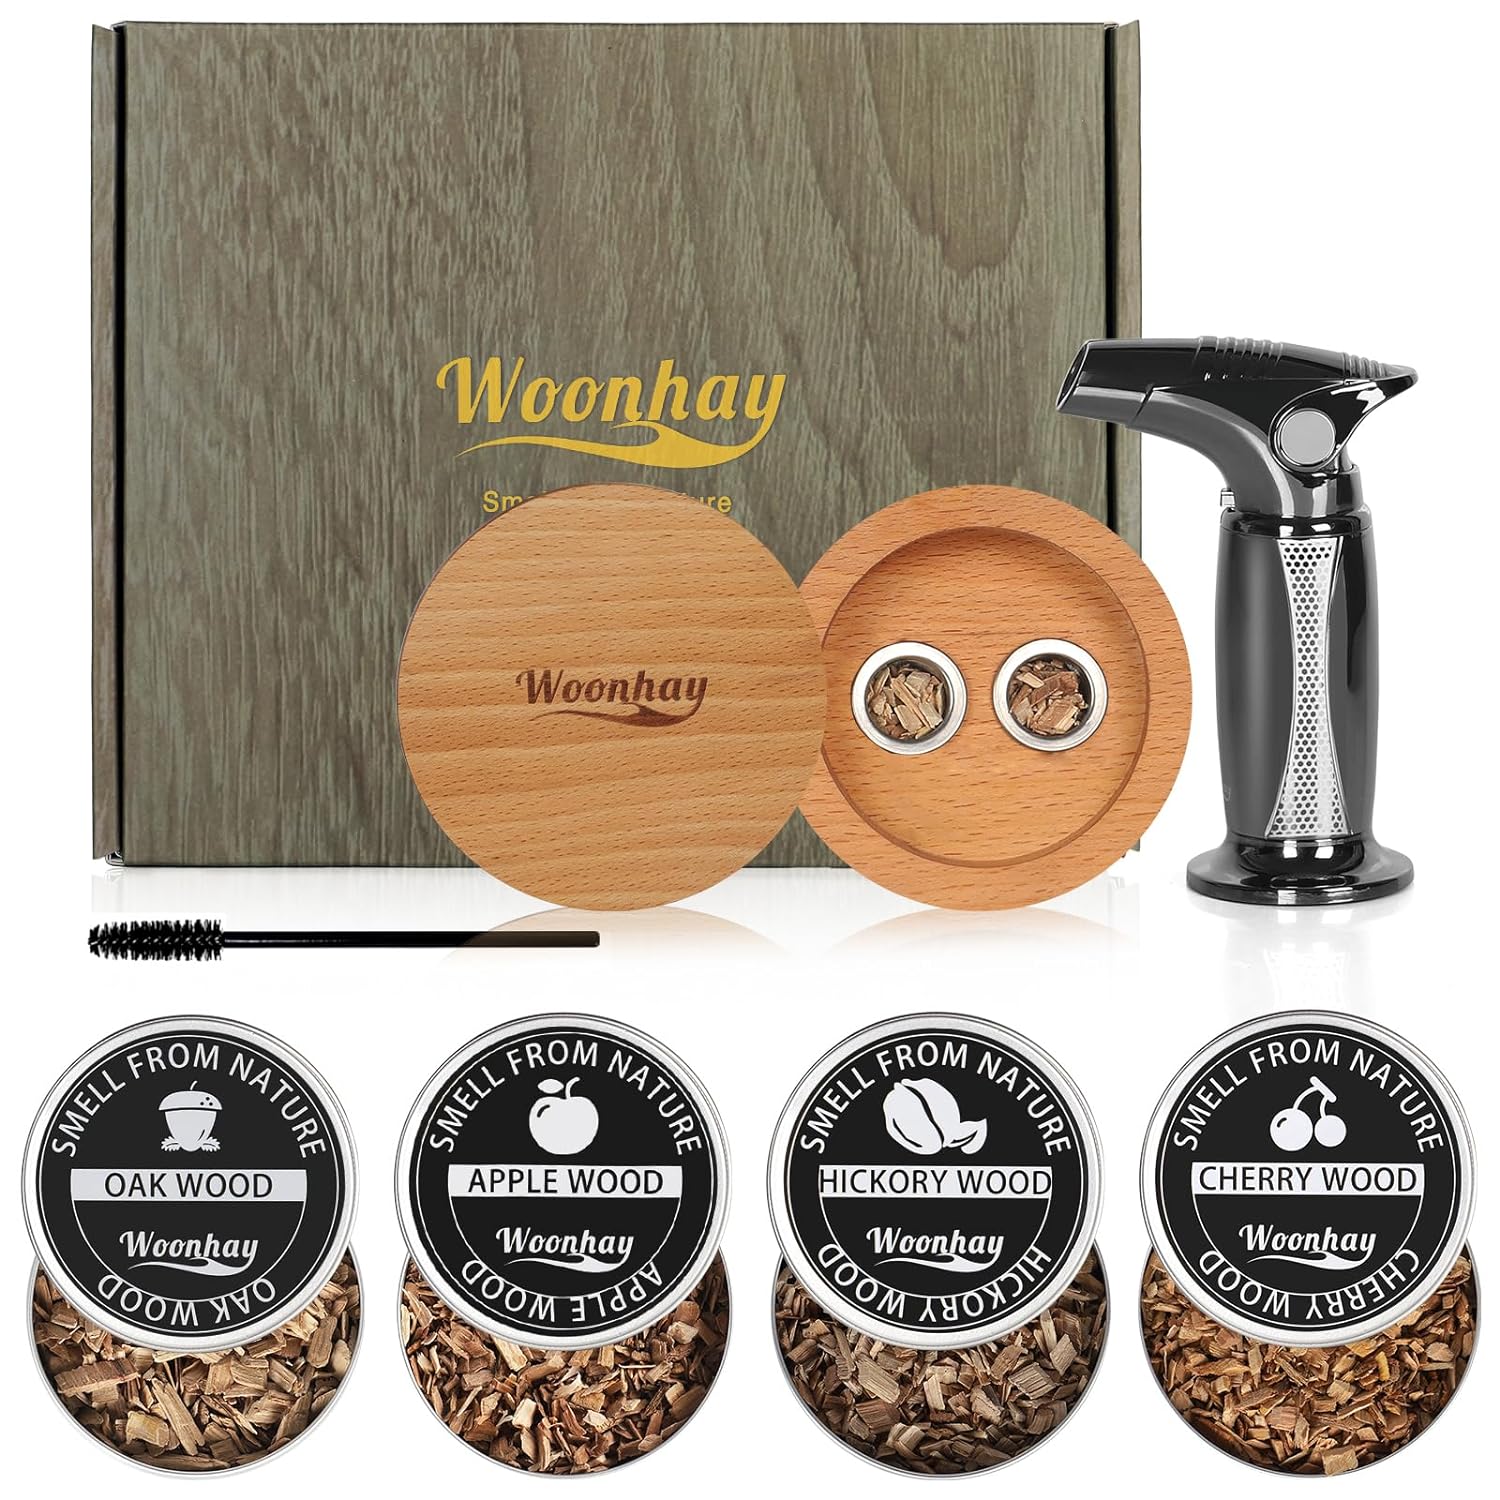 Cocktail Smoker Kit with Torch, 4 Flavors Wood Chips, Old Fashioned Cocktail Whiskey Gifts for Men, Drinking Accessories for Cocktails/Wine/Whiskey/Bourbon, Ideal Gifts for Dad, Husband (No Butane)